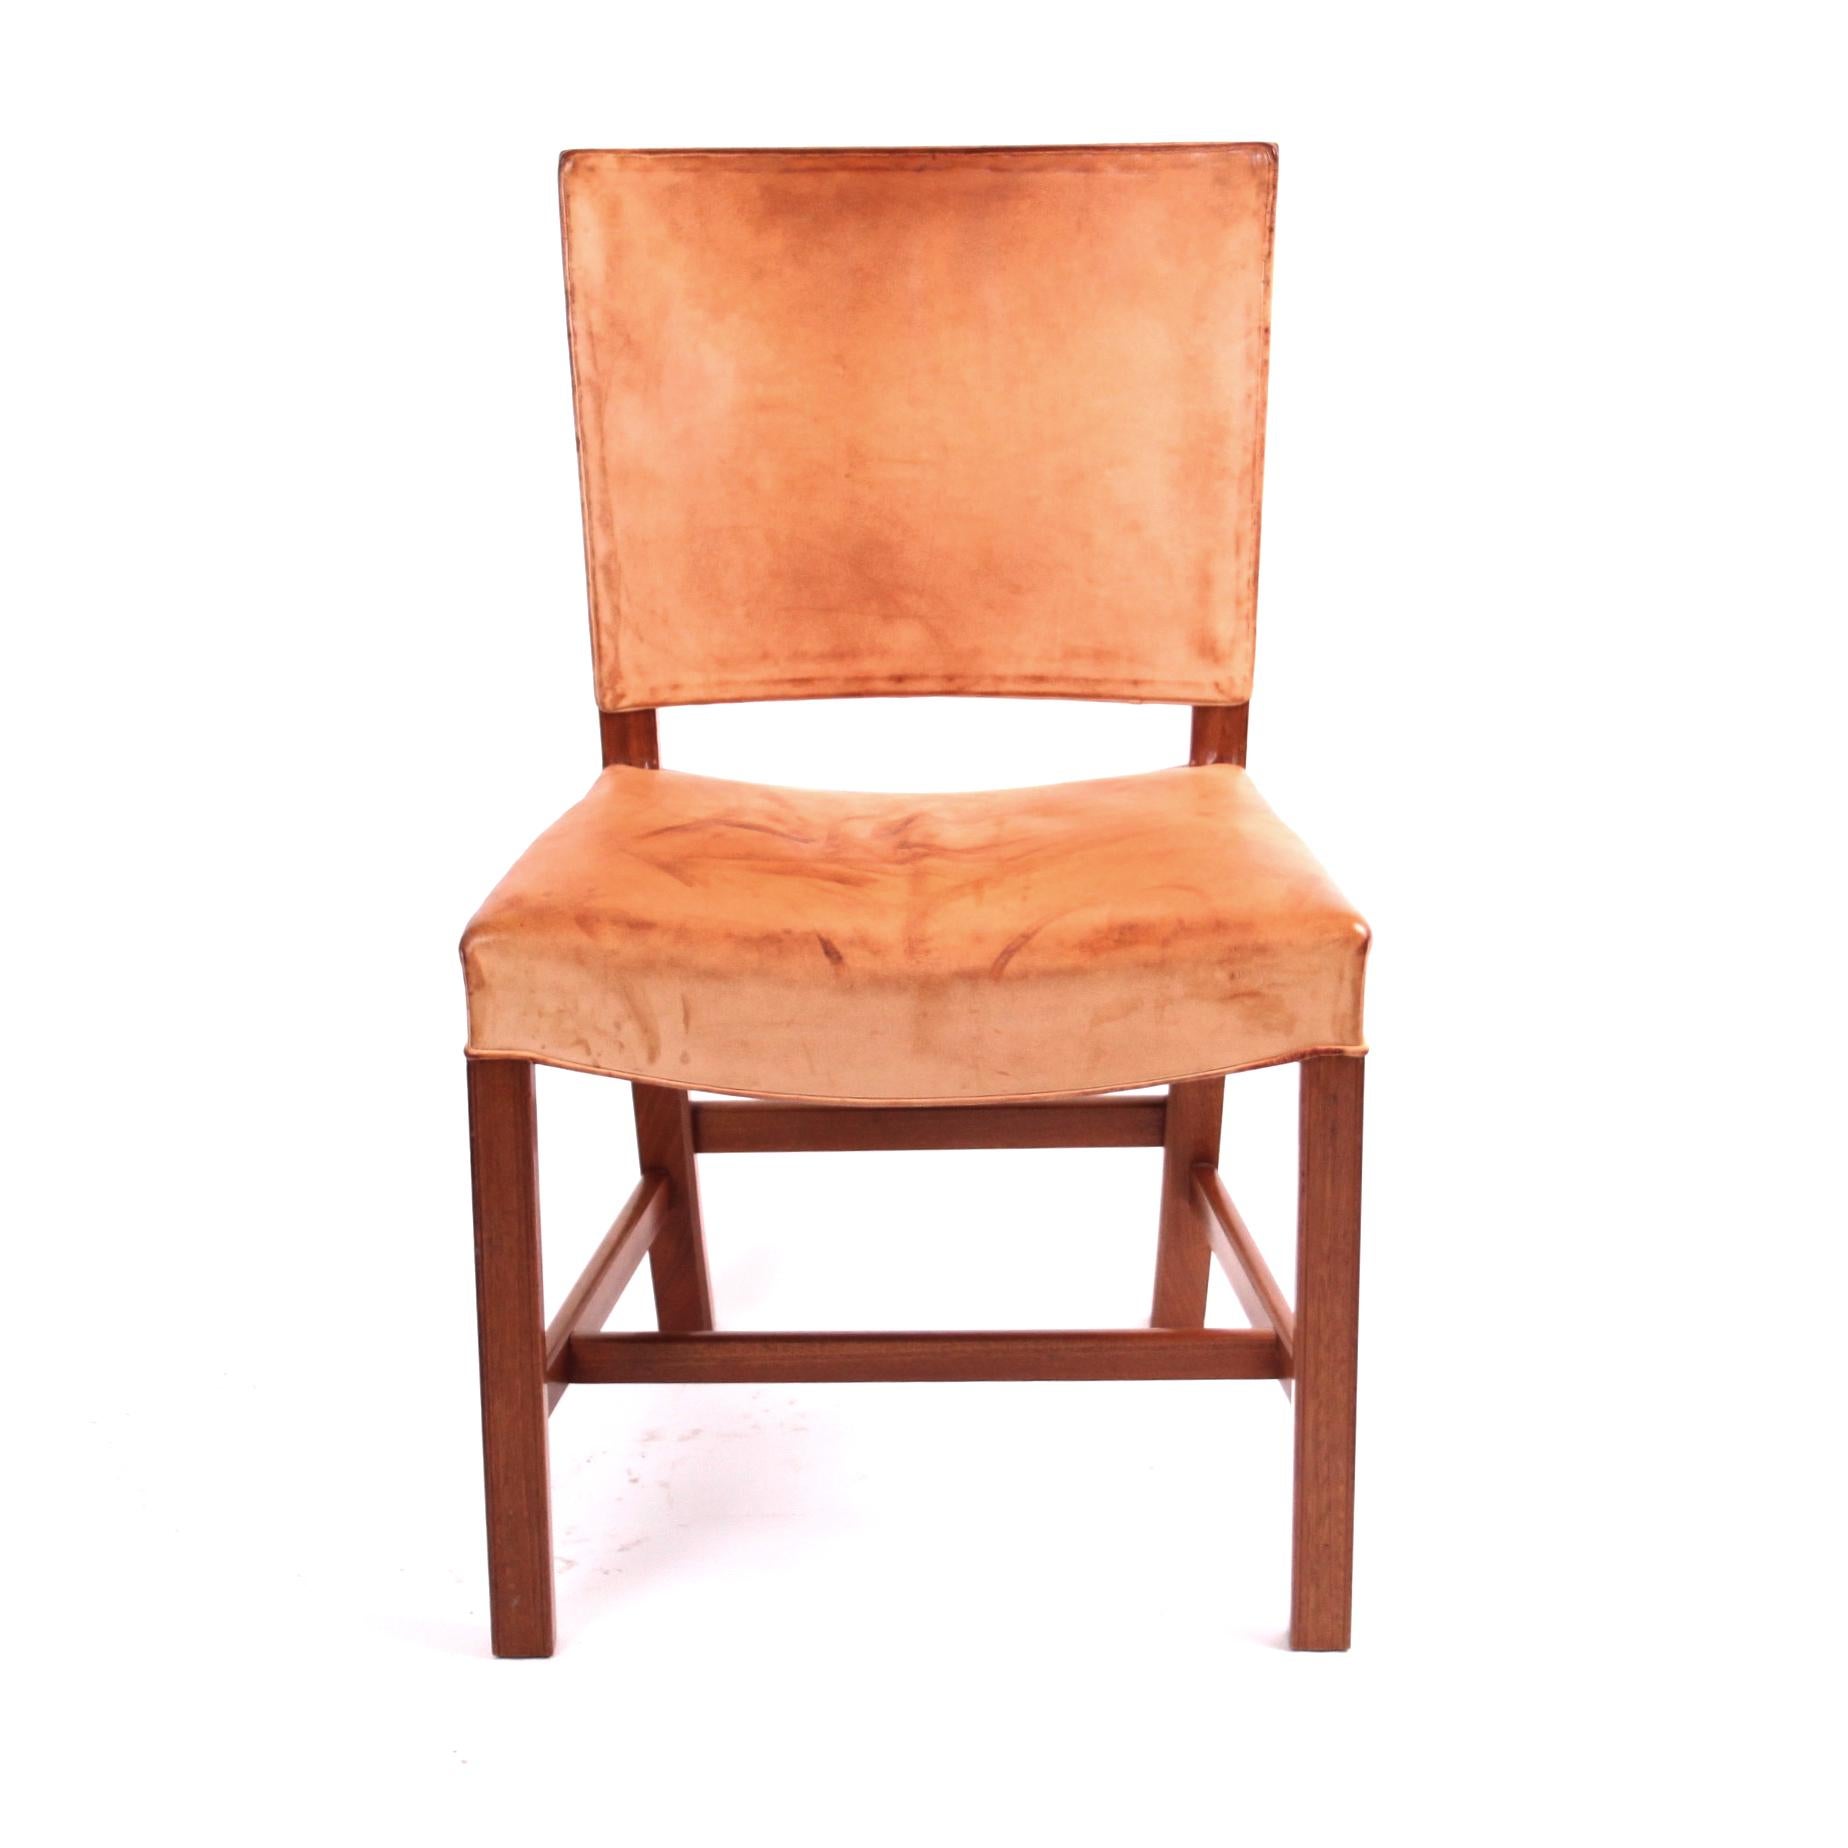 Kaare Klint “Red Chair” in Patinated Natural Leather with Piping 1